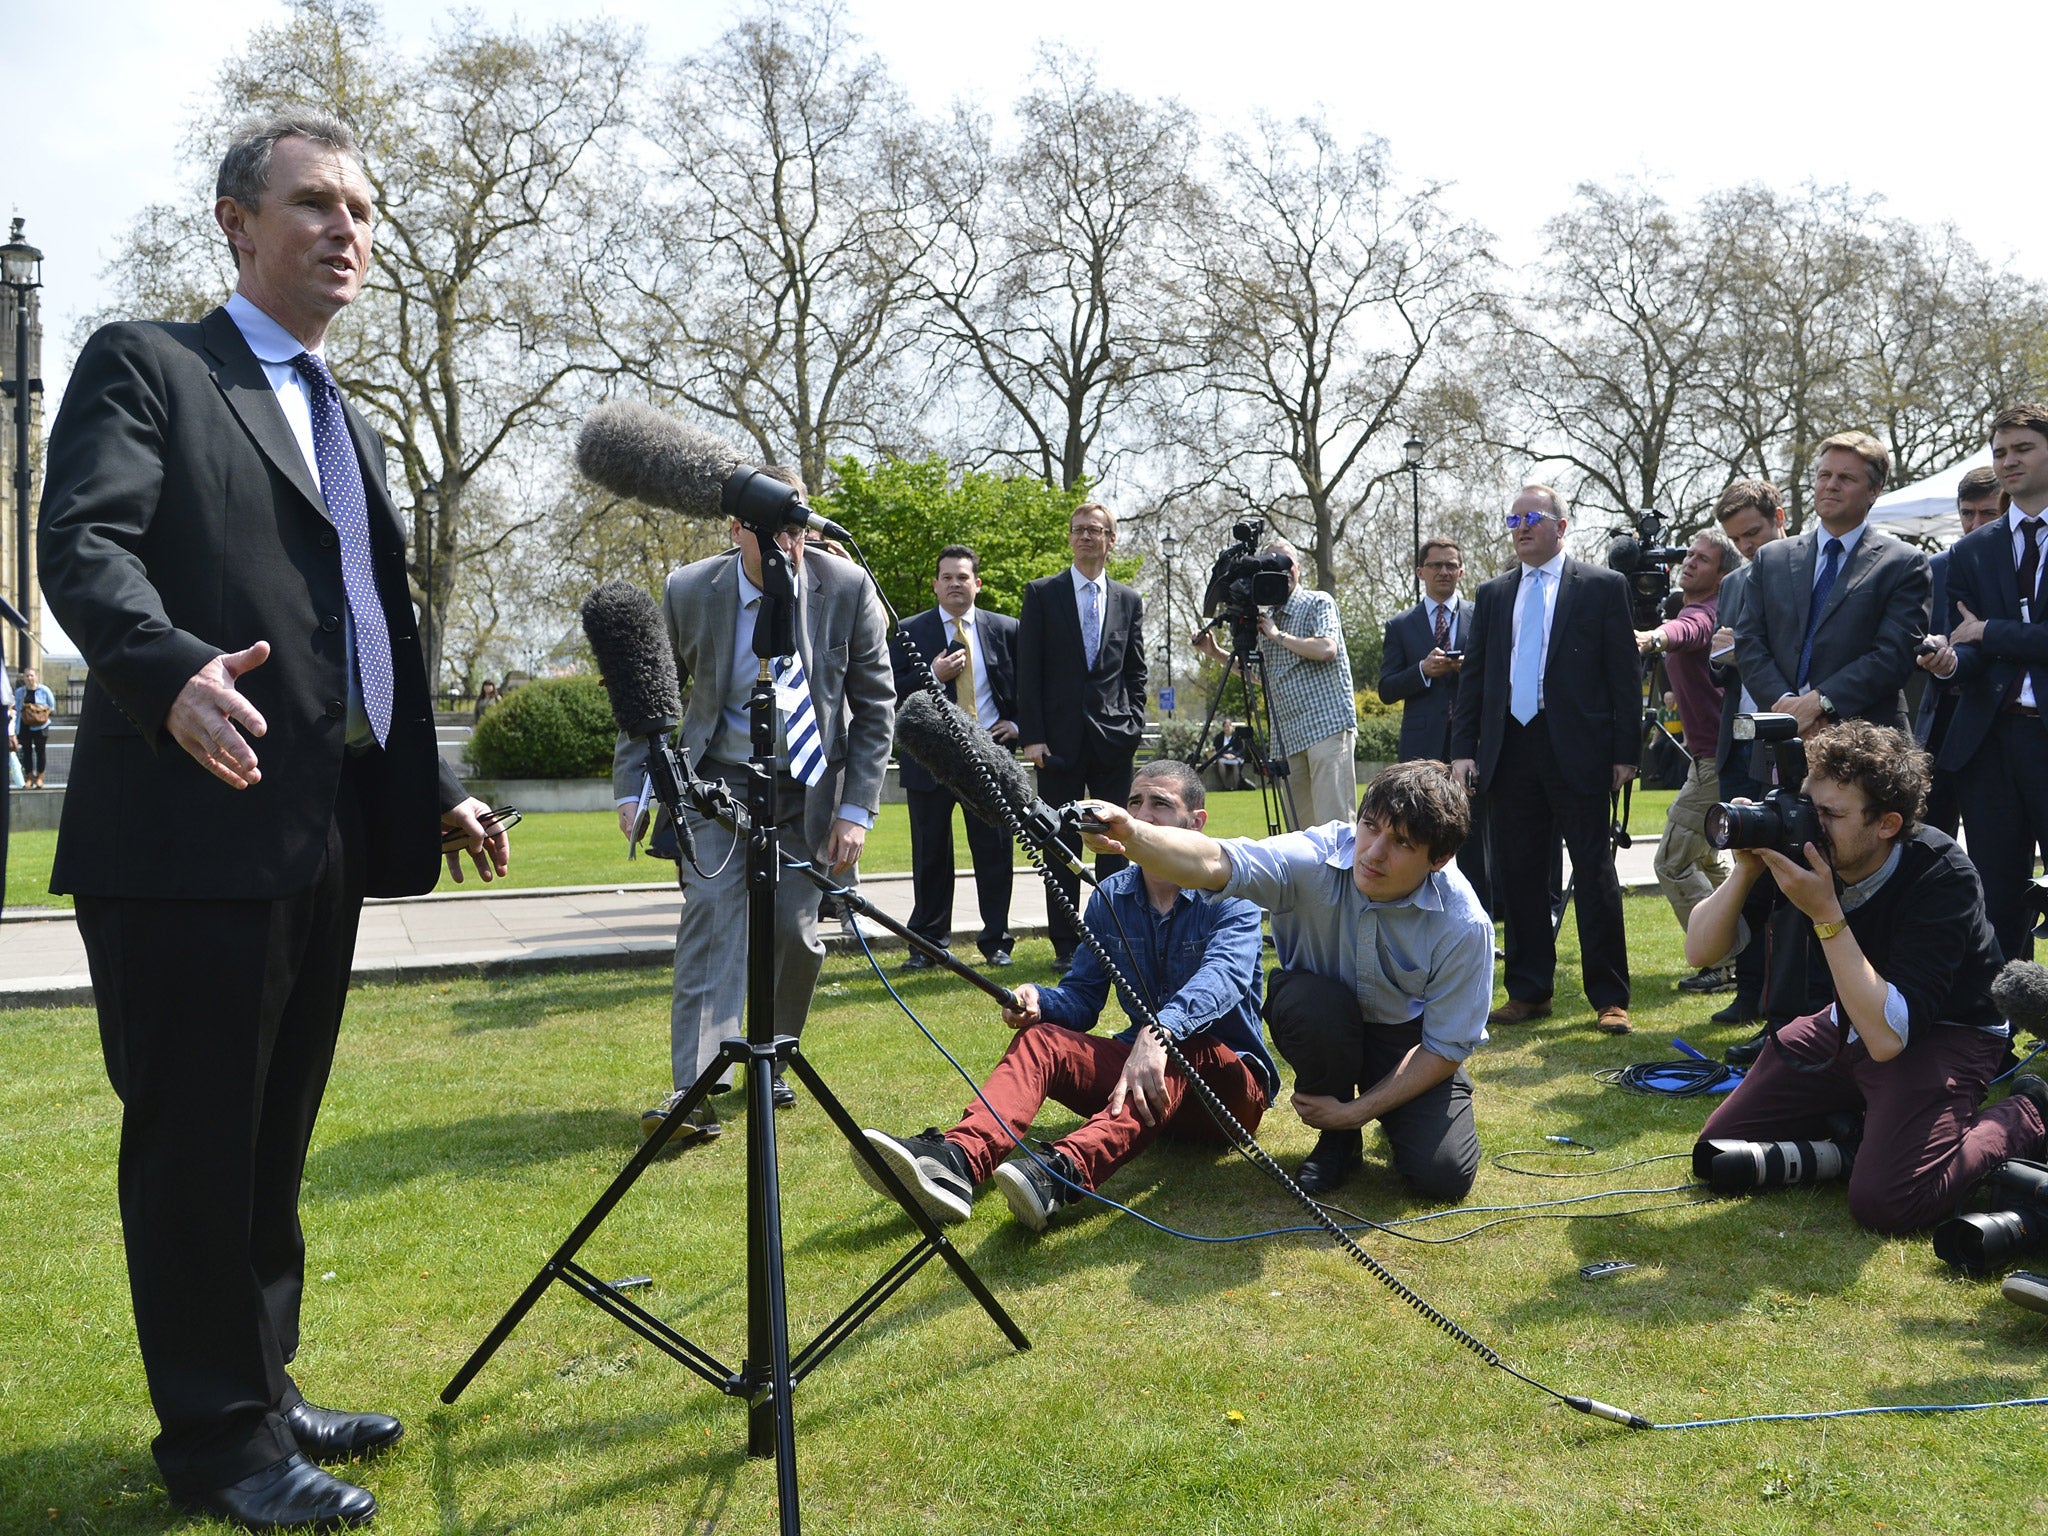 7 May 2013: Conservative MP and deputy speaker of Britain's parliament Nigel Evans speaks to the media outside of the Houses of Parliament in London.